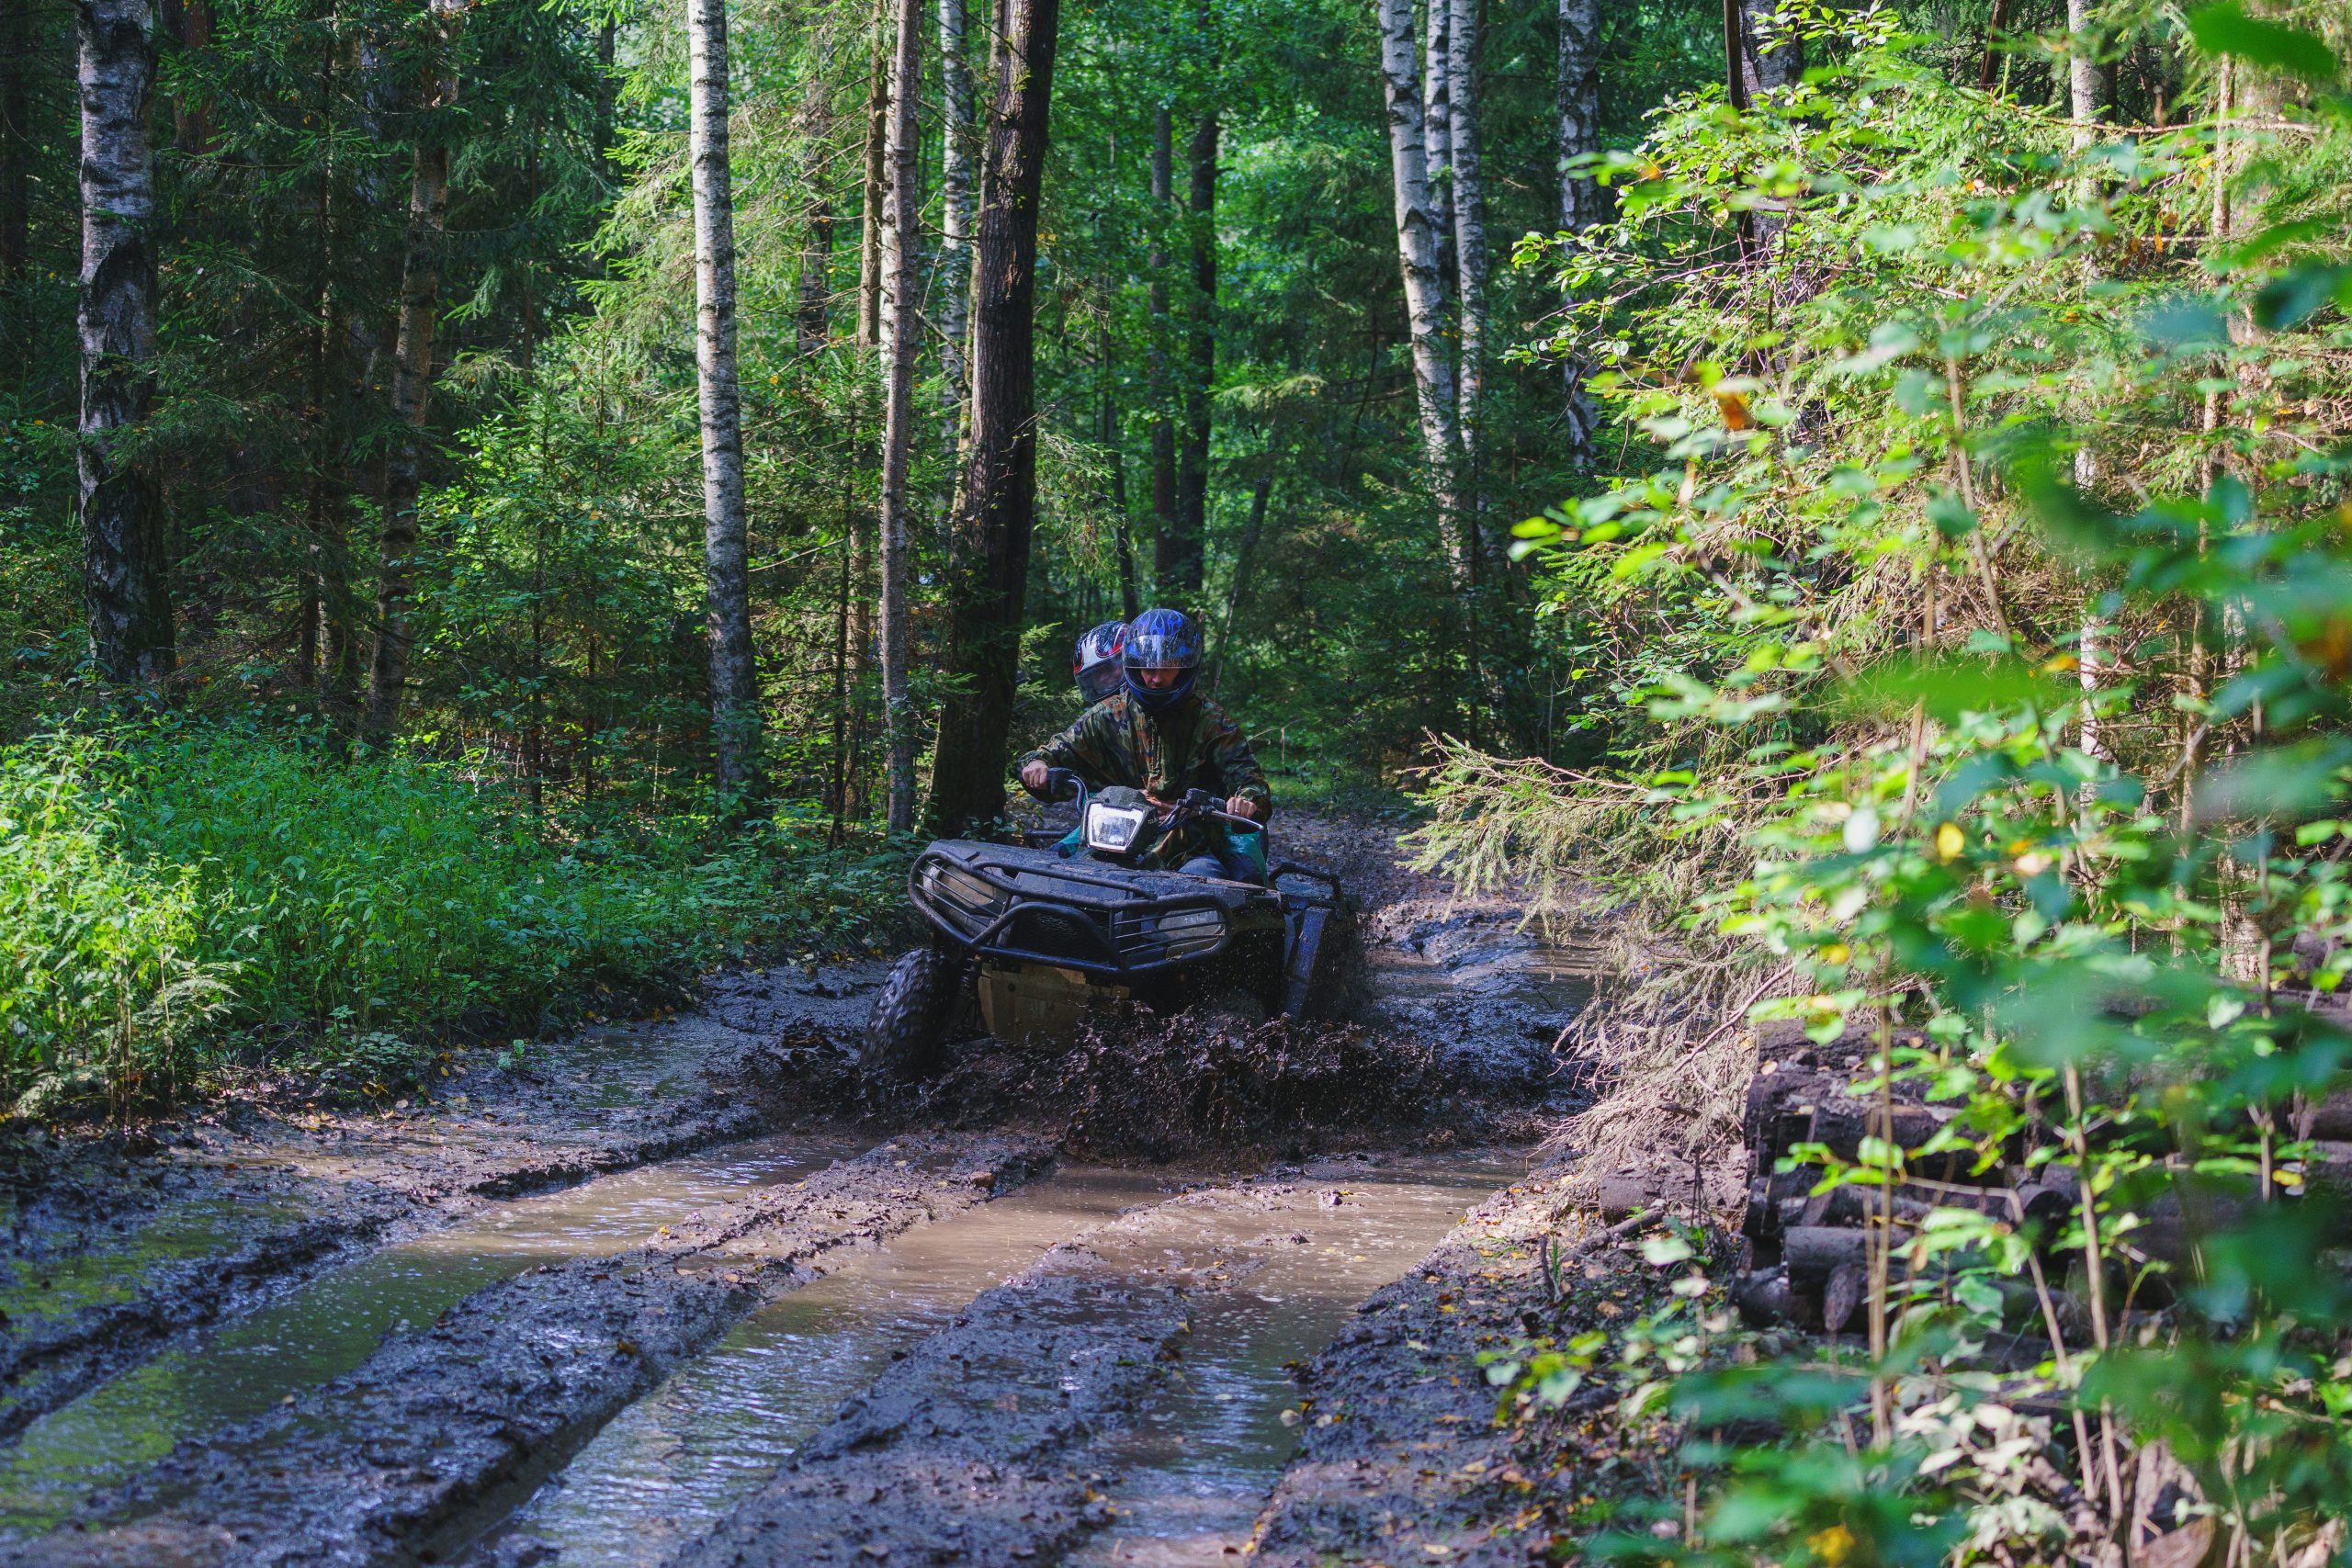 summer-activities-for-adults-a-trip-on-quad-bike-2021-08-26-16-59-55-utc